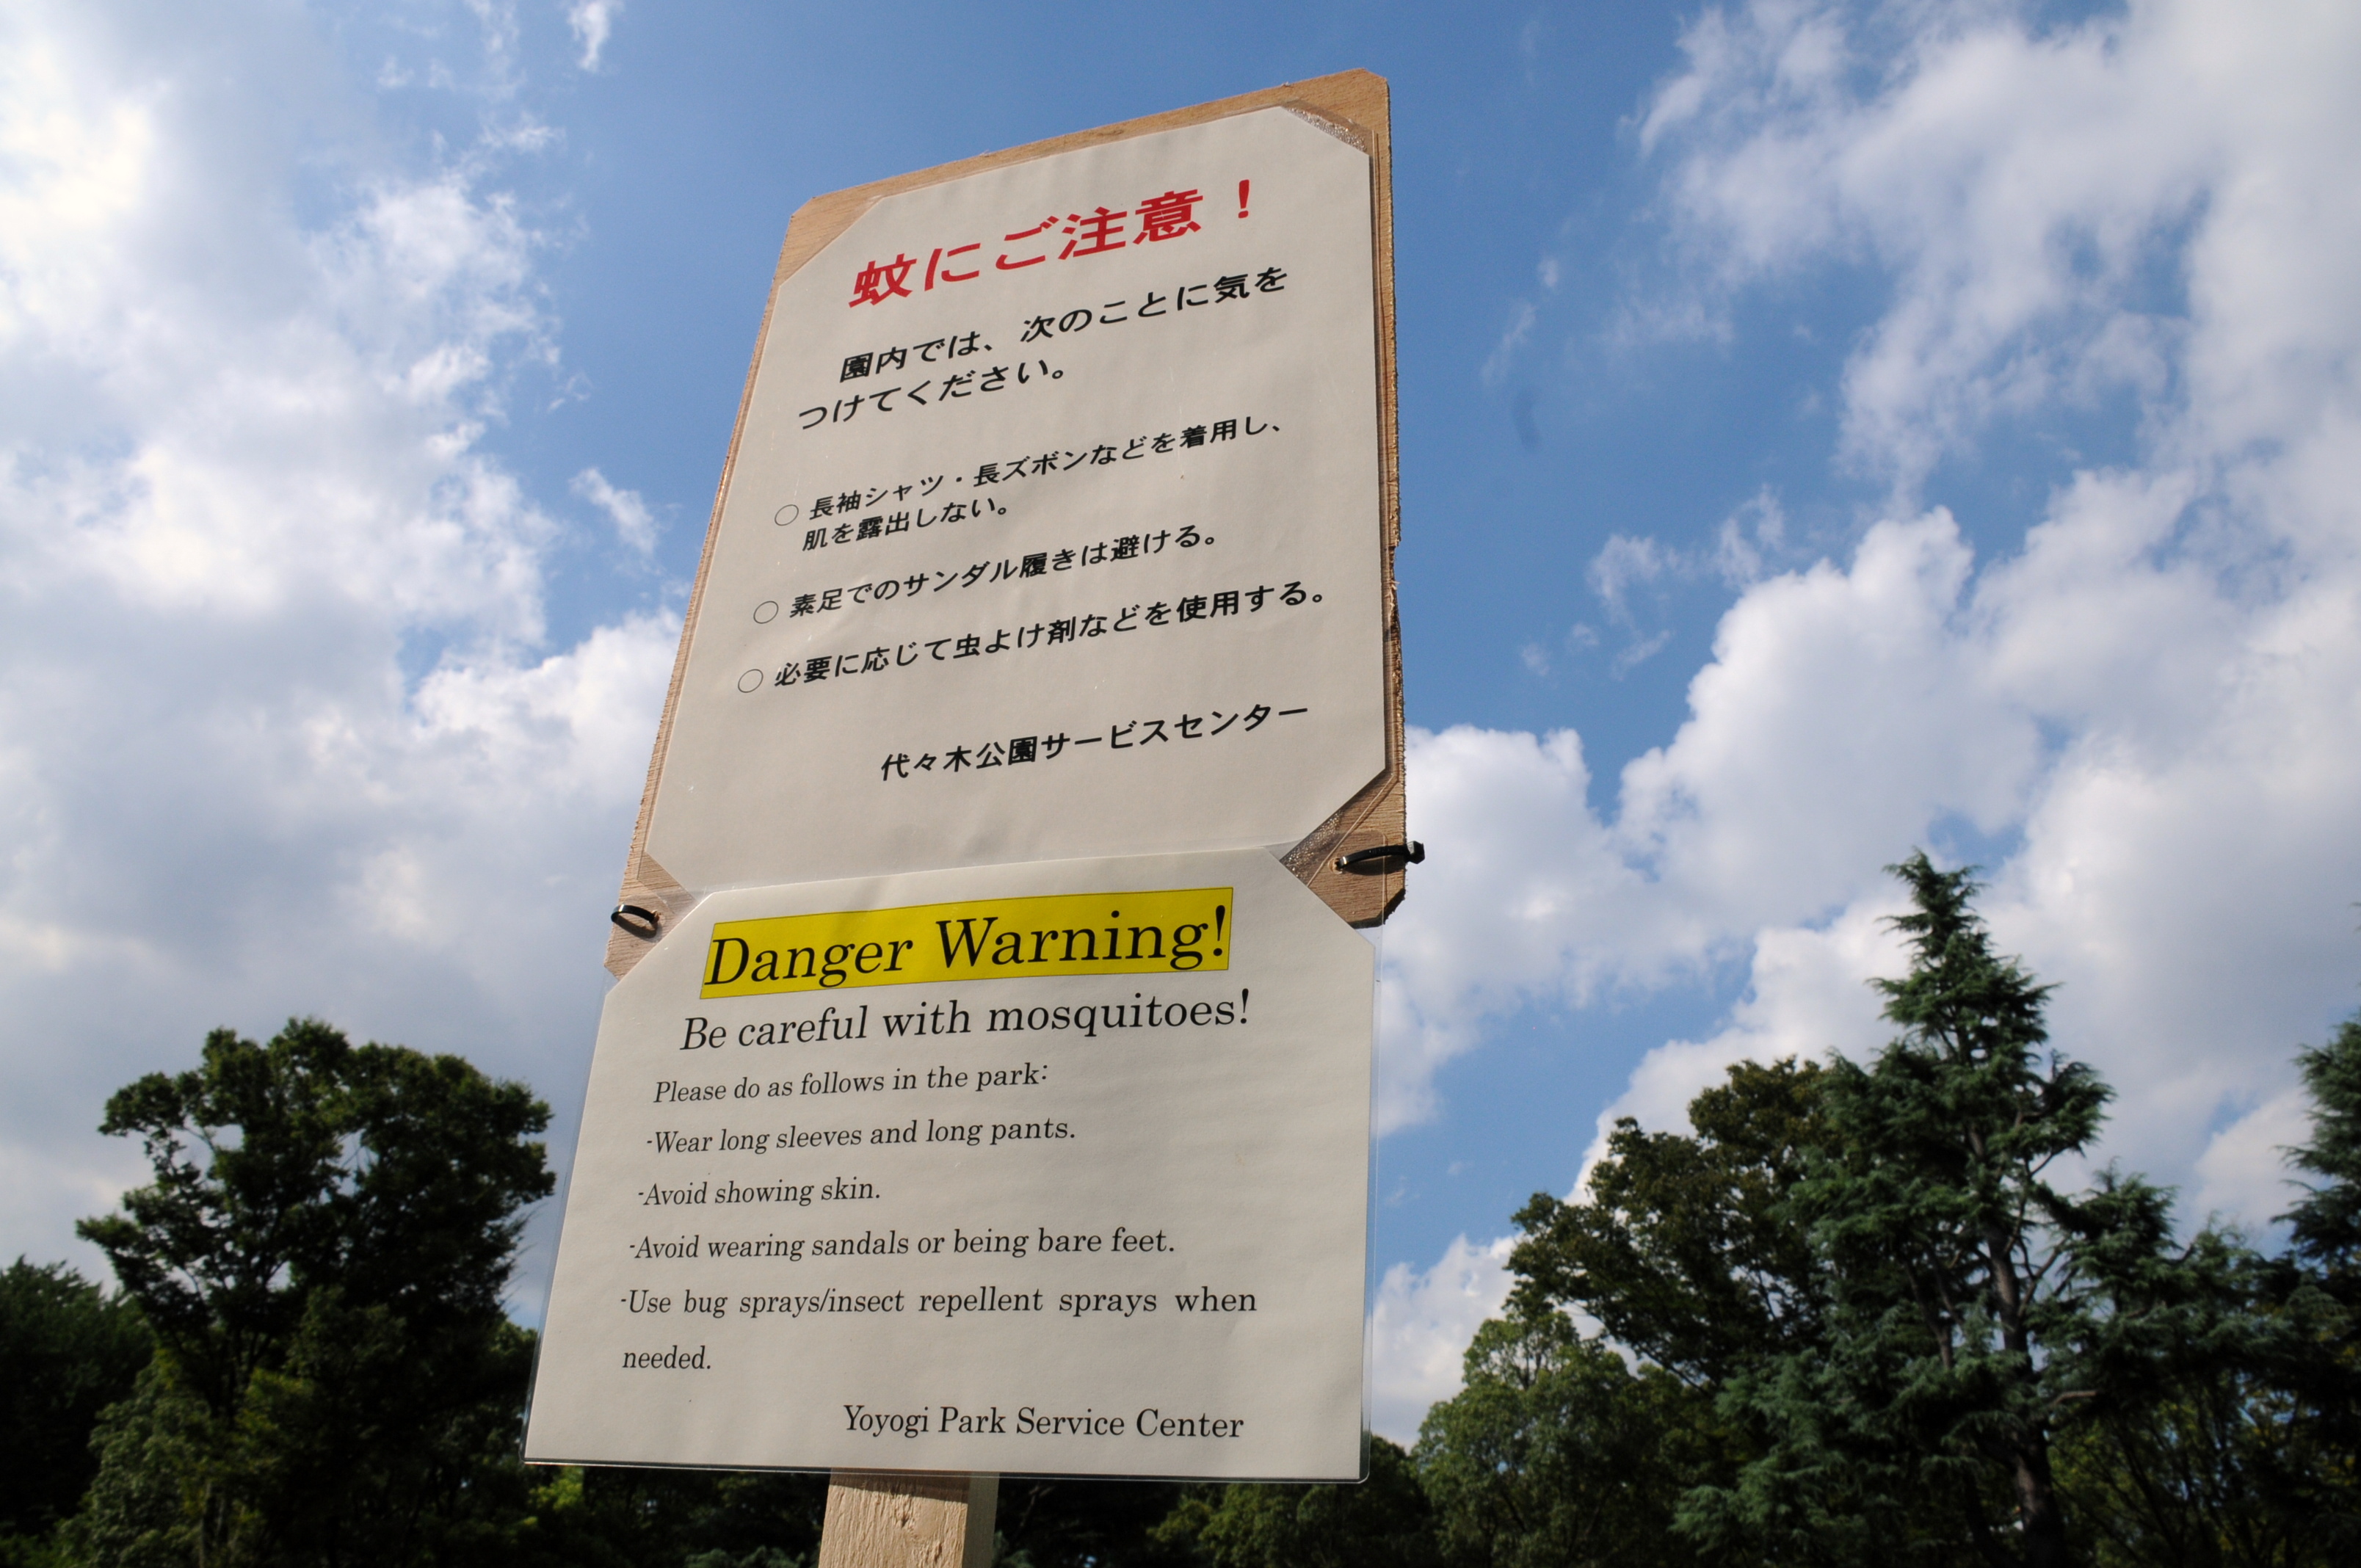 A photo taken Tuesday shows a notice in Yoyogi Park warning visitors about mosquitoes. The Tokyo Metropolitan Government decided Thursday to close certain areas today due to the discovery of mosquitoes carrying dengue fever. | SATOKO KAWASAKI